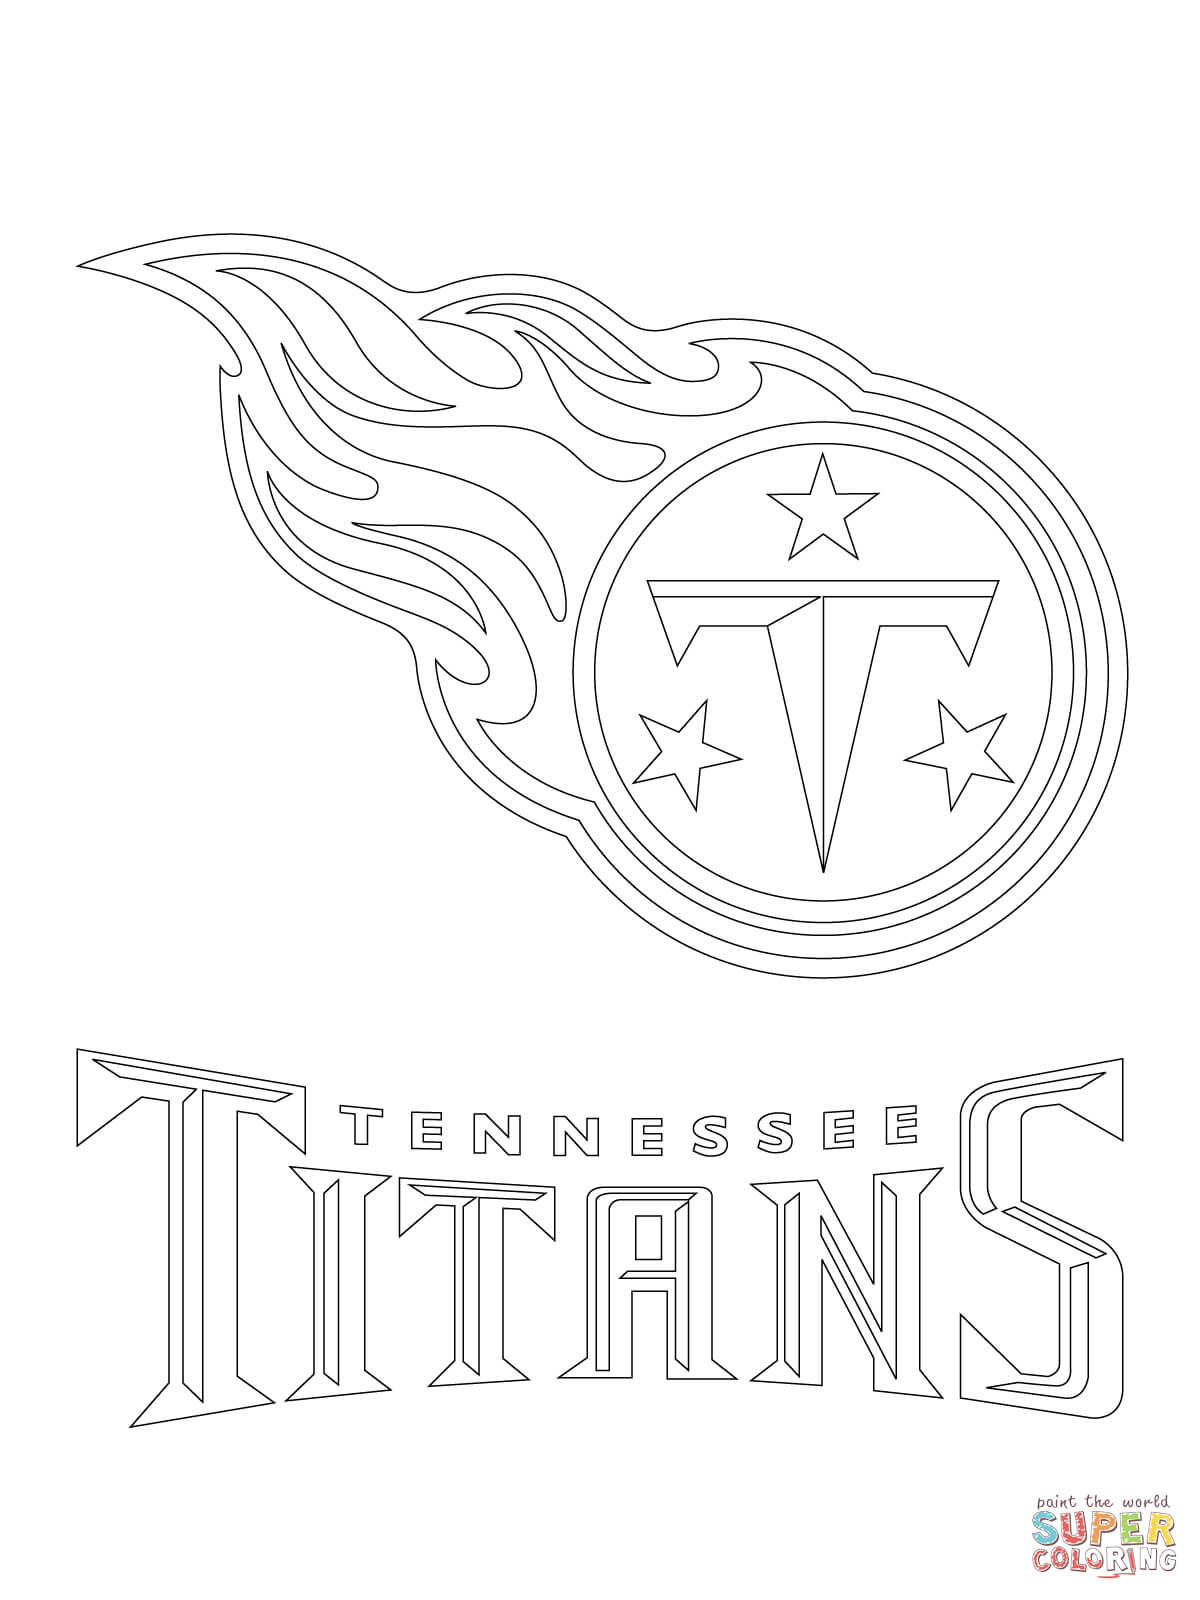 Tennessee Titans Logo coloring page | Free Printable Coloring Pages